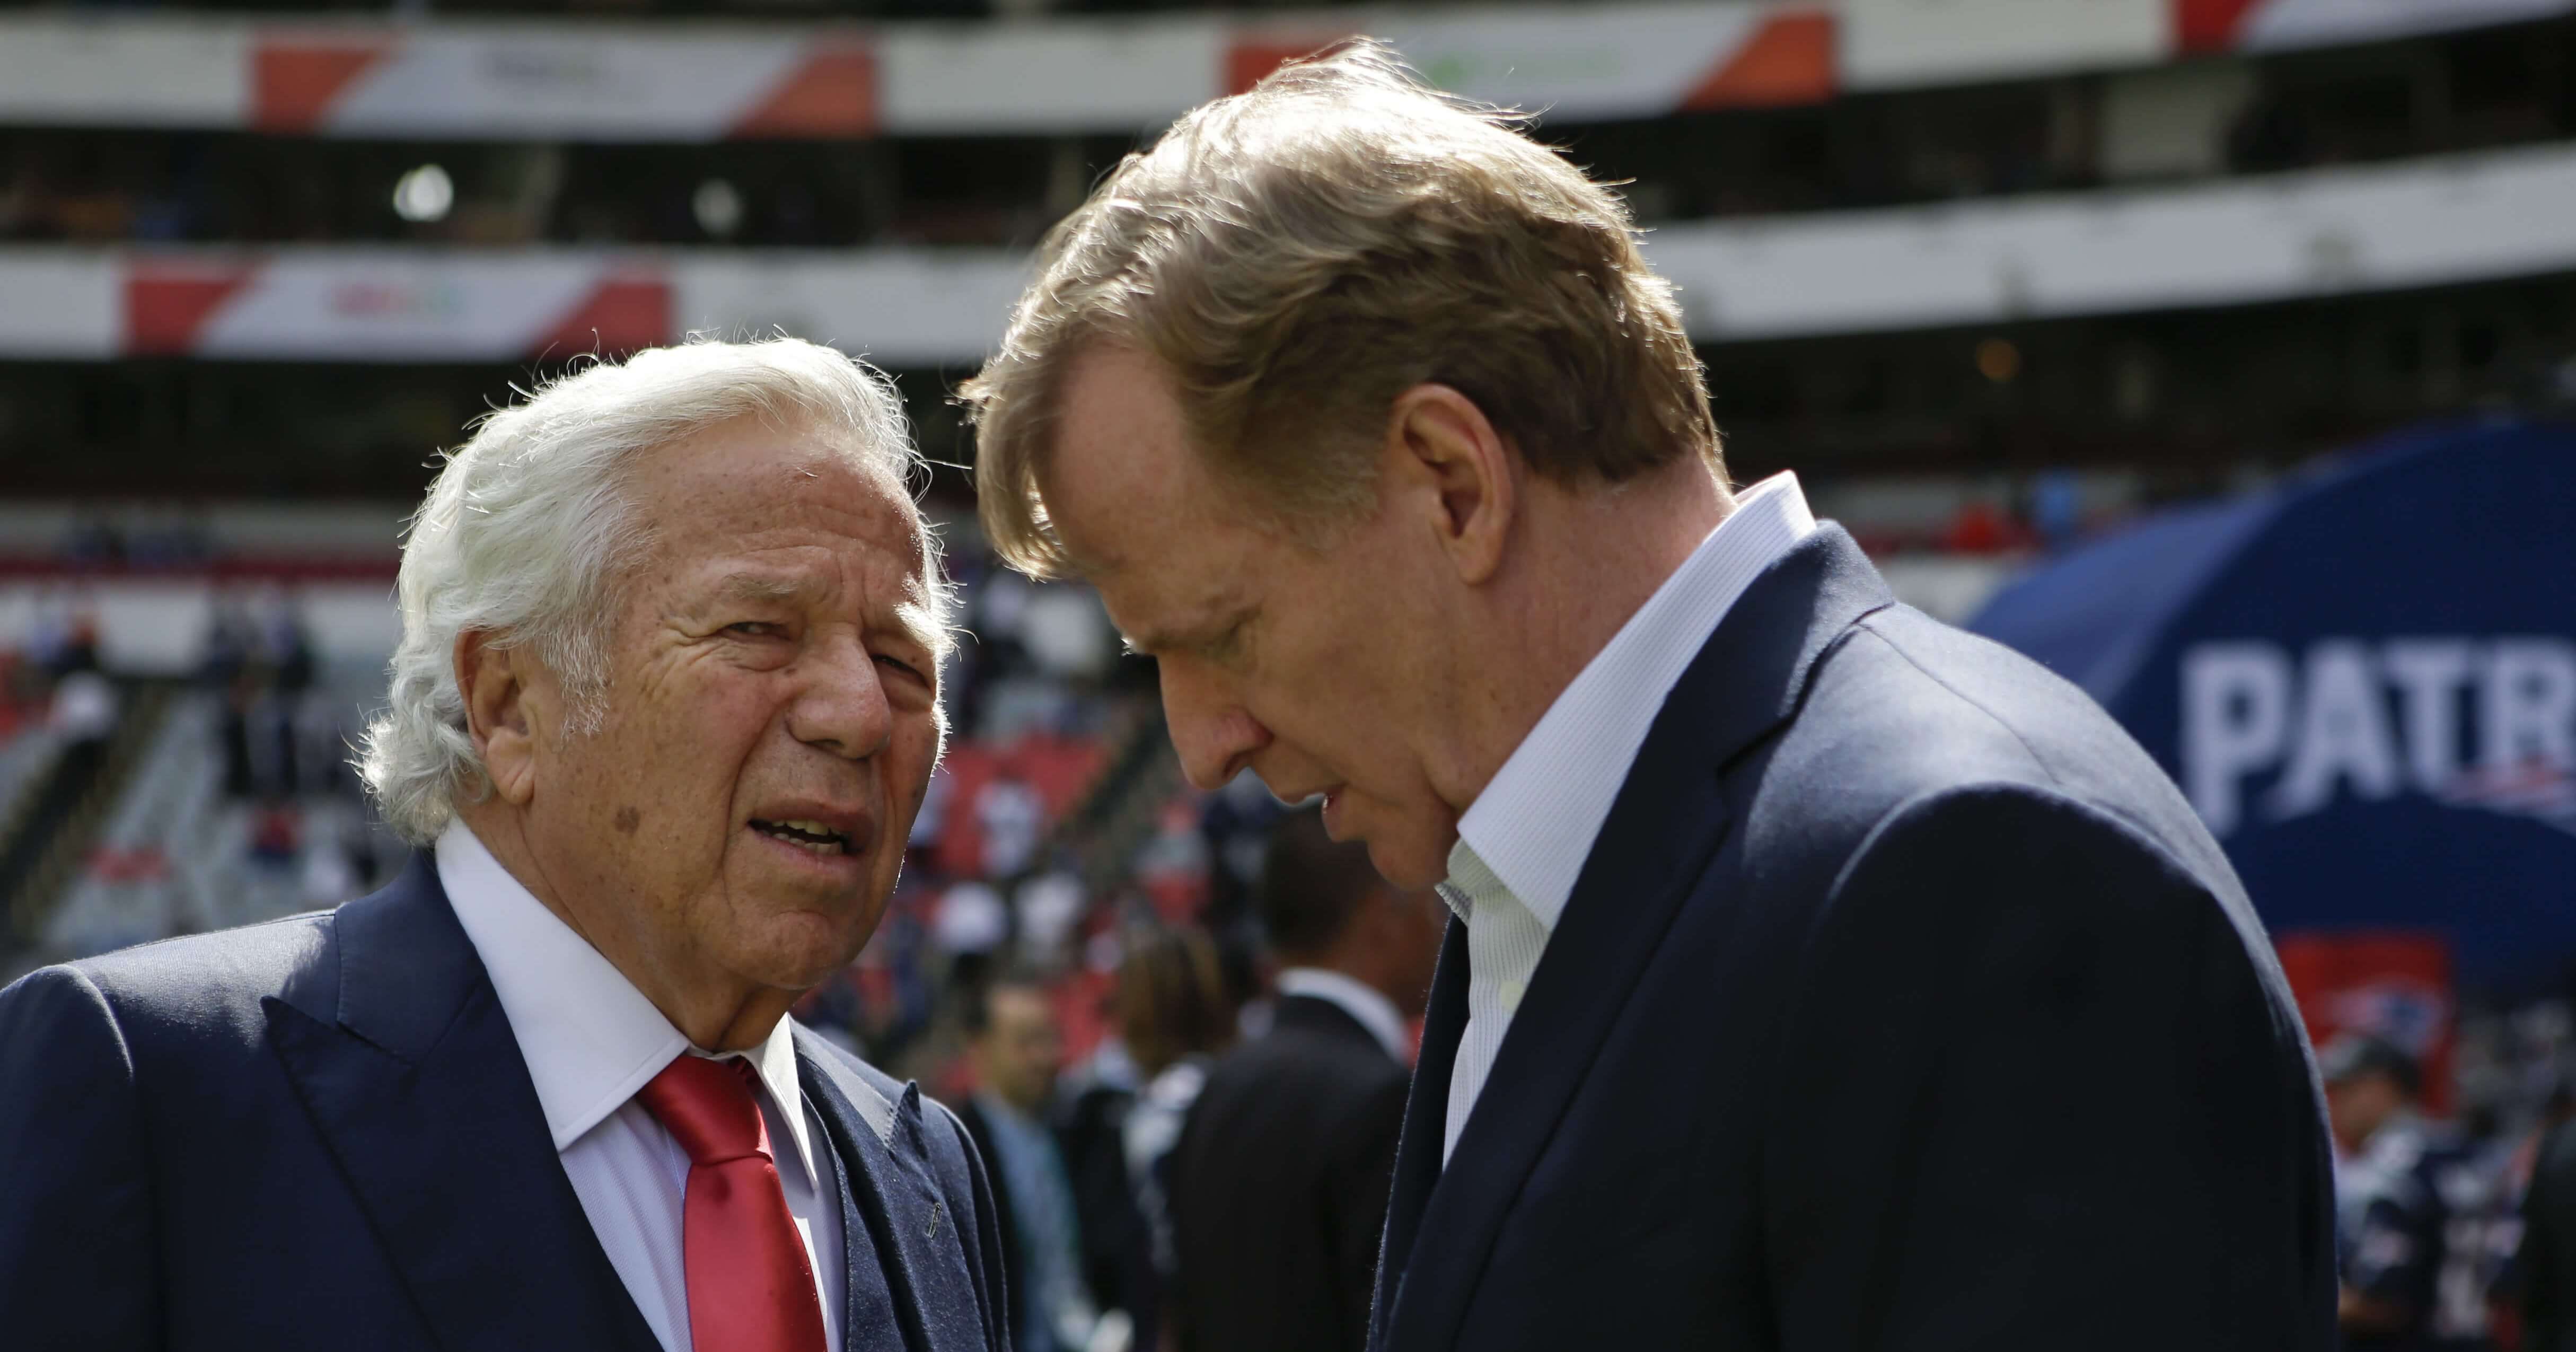 NFL Commissioner Roger Goodell, right, talks with New England Patriots owner Robert Kraft before the Patriots face the Oakland Raiders in Mexico City on Nov. 19, 2017.